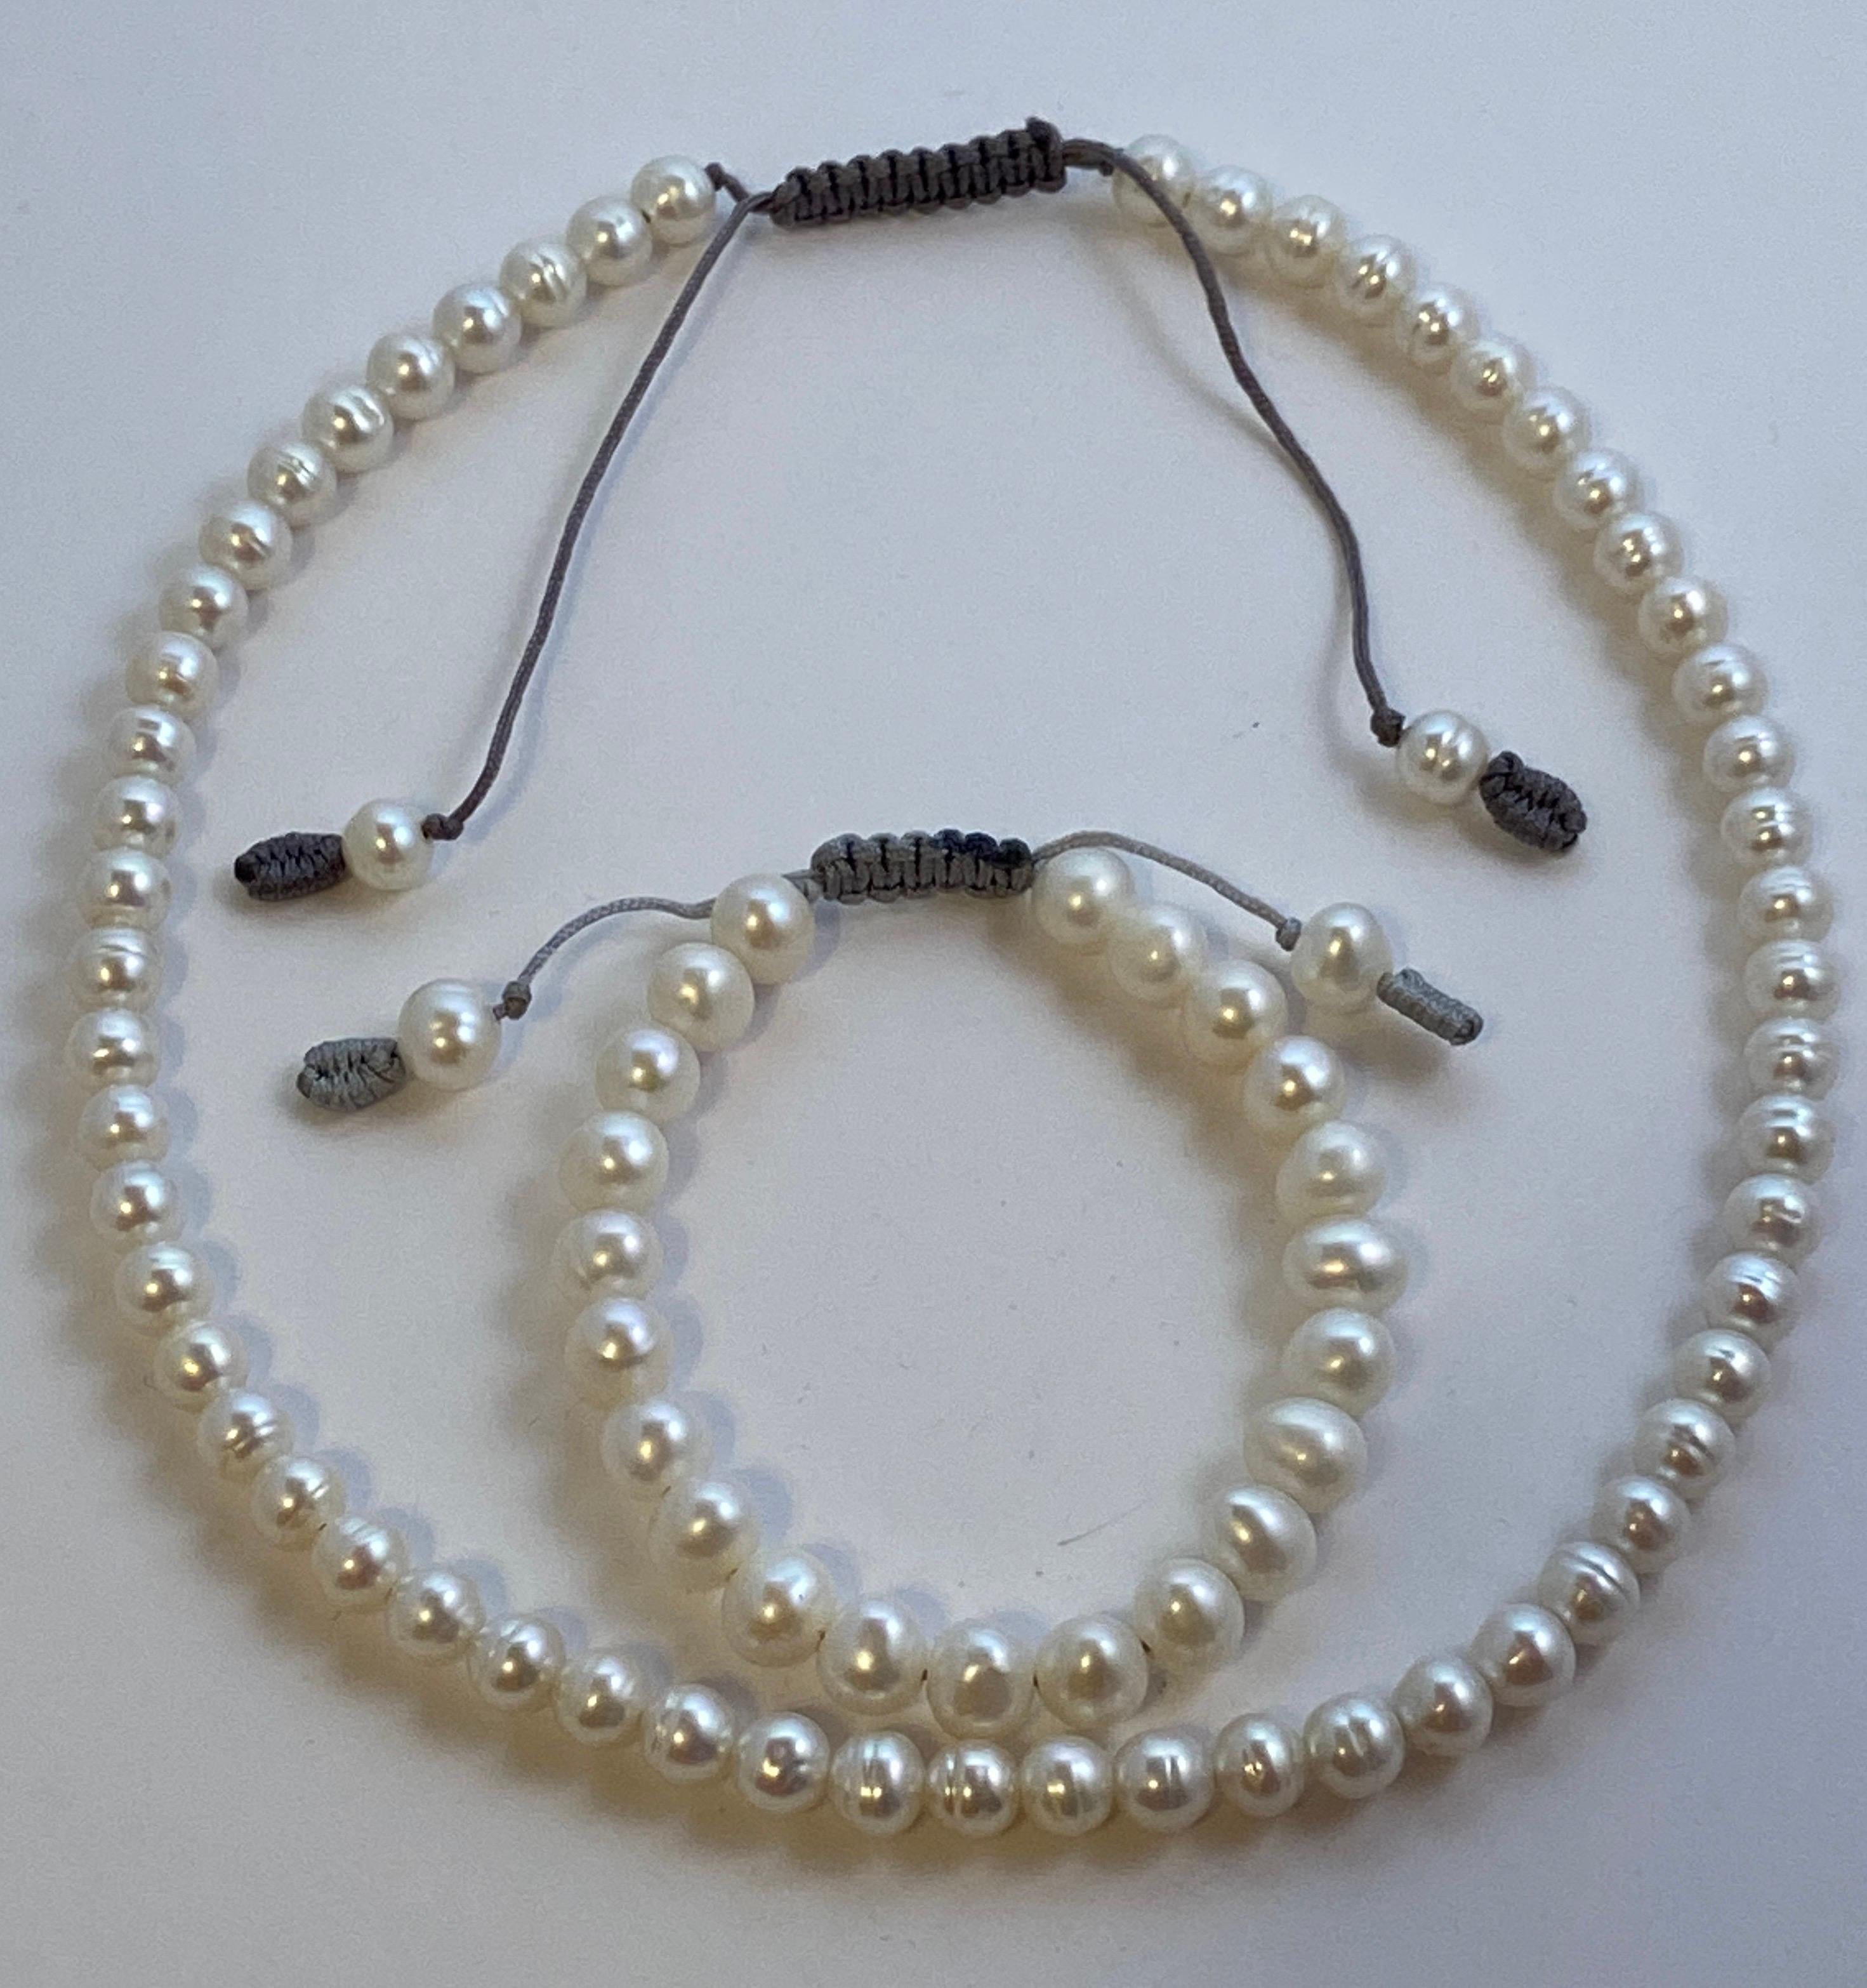 Set of hand-strung pearl necklace with matching bracelet set has adjustable options to widen if desire. Just gently pull the hand-knotted string to adjust. The necklace measures 17 1/2 inches at the smallest and 22 3/4 inches at the longest. The